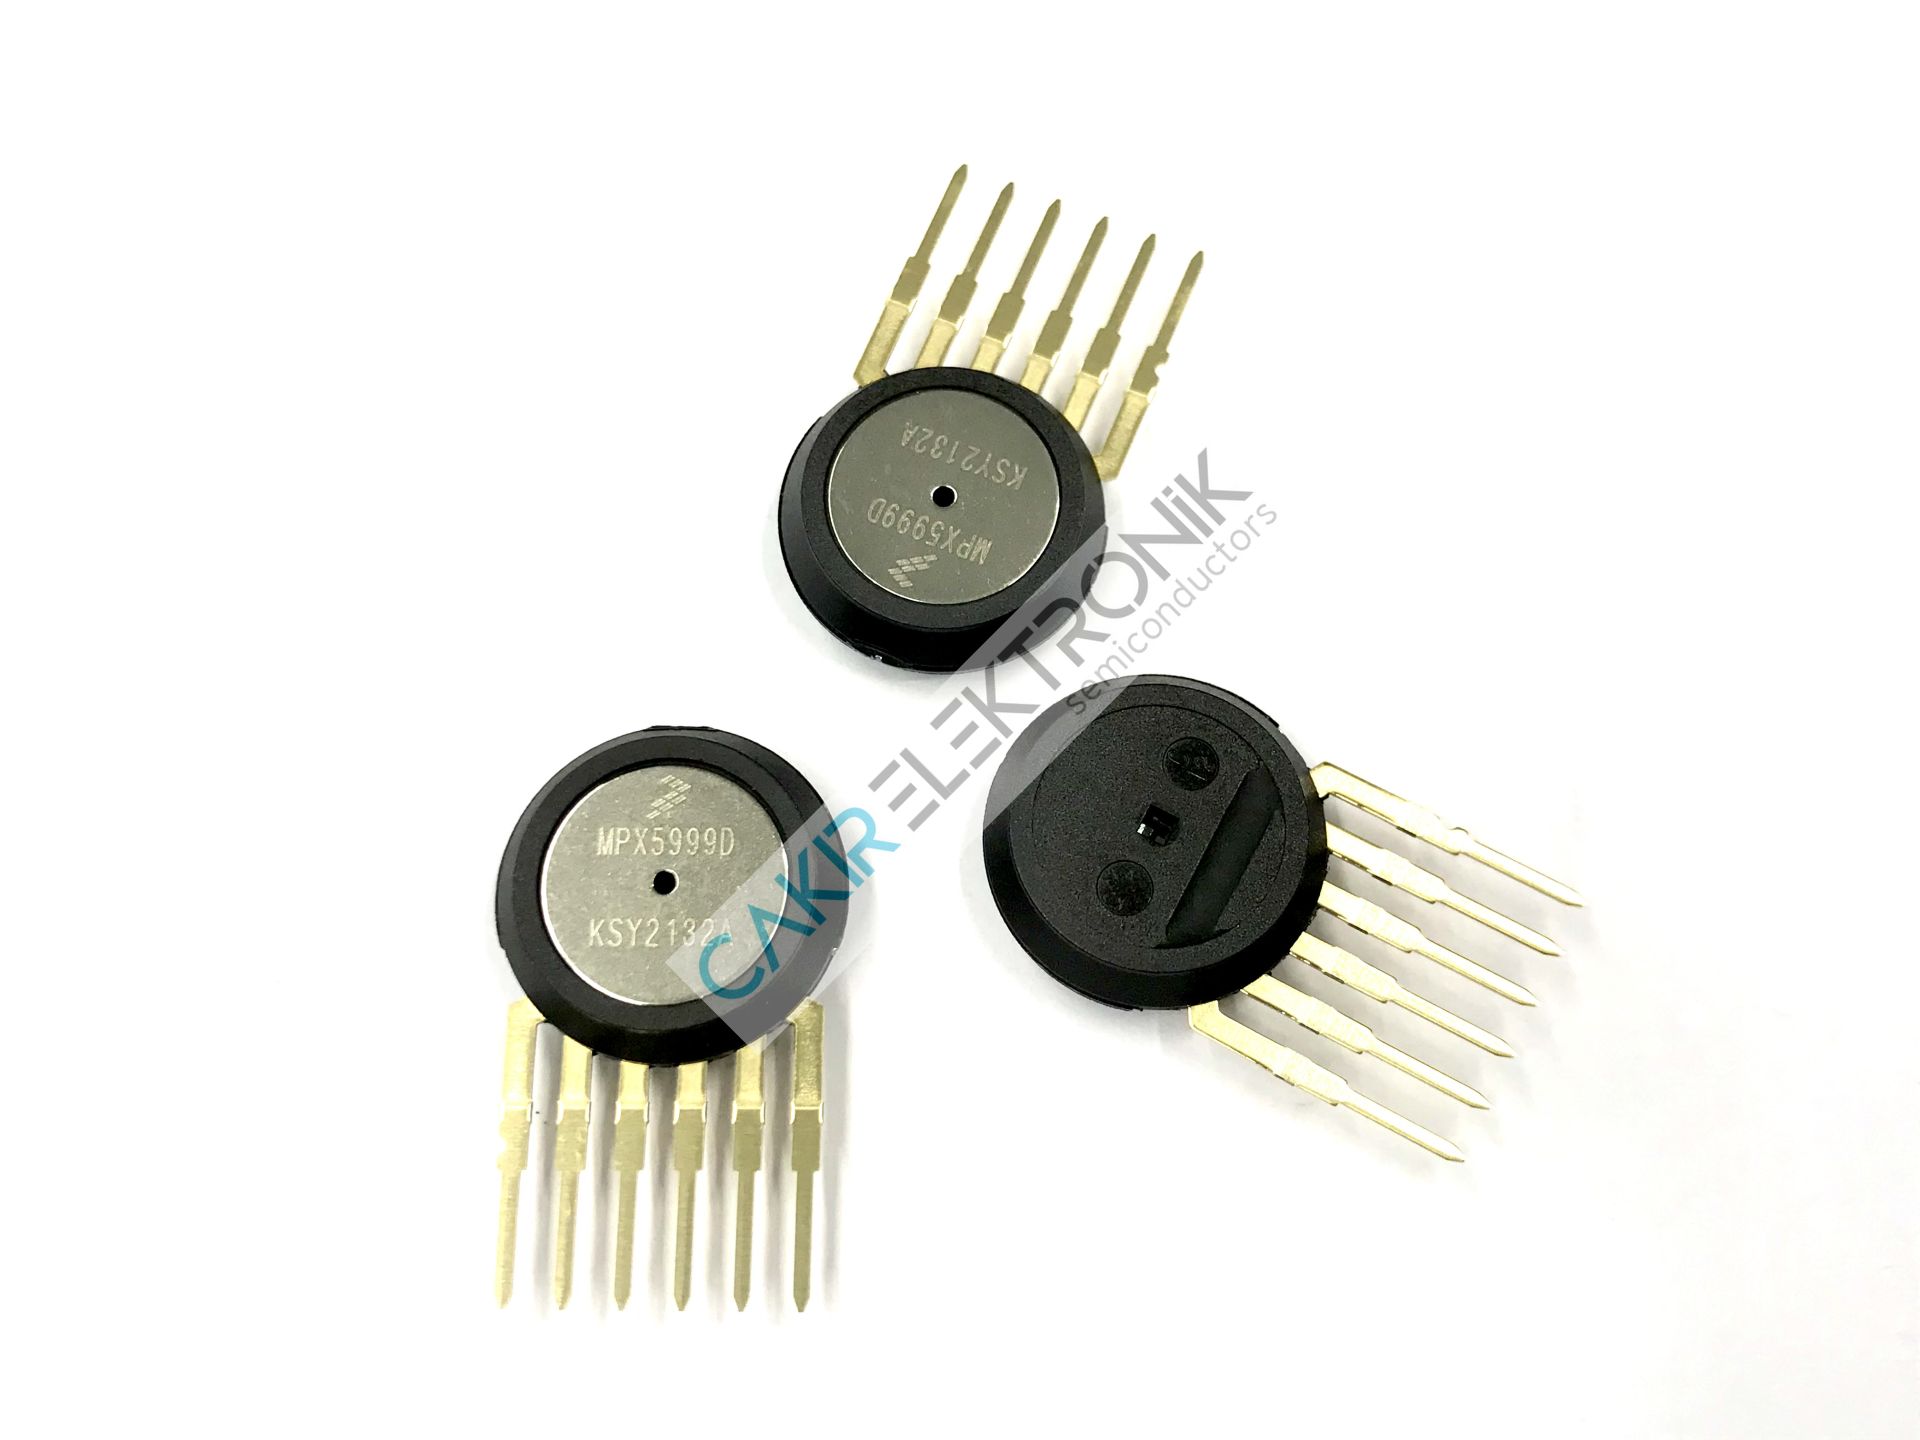 MPX5999D On-Chip  Signal  Conditioned, 0.2  V  to  4.7  V  Output,  Temperature Compensated  and  Calibrated, Silicon  Pressure  Sensor